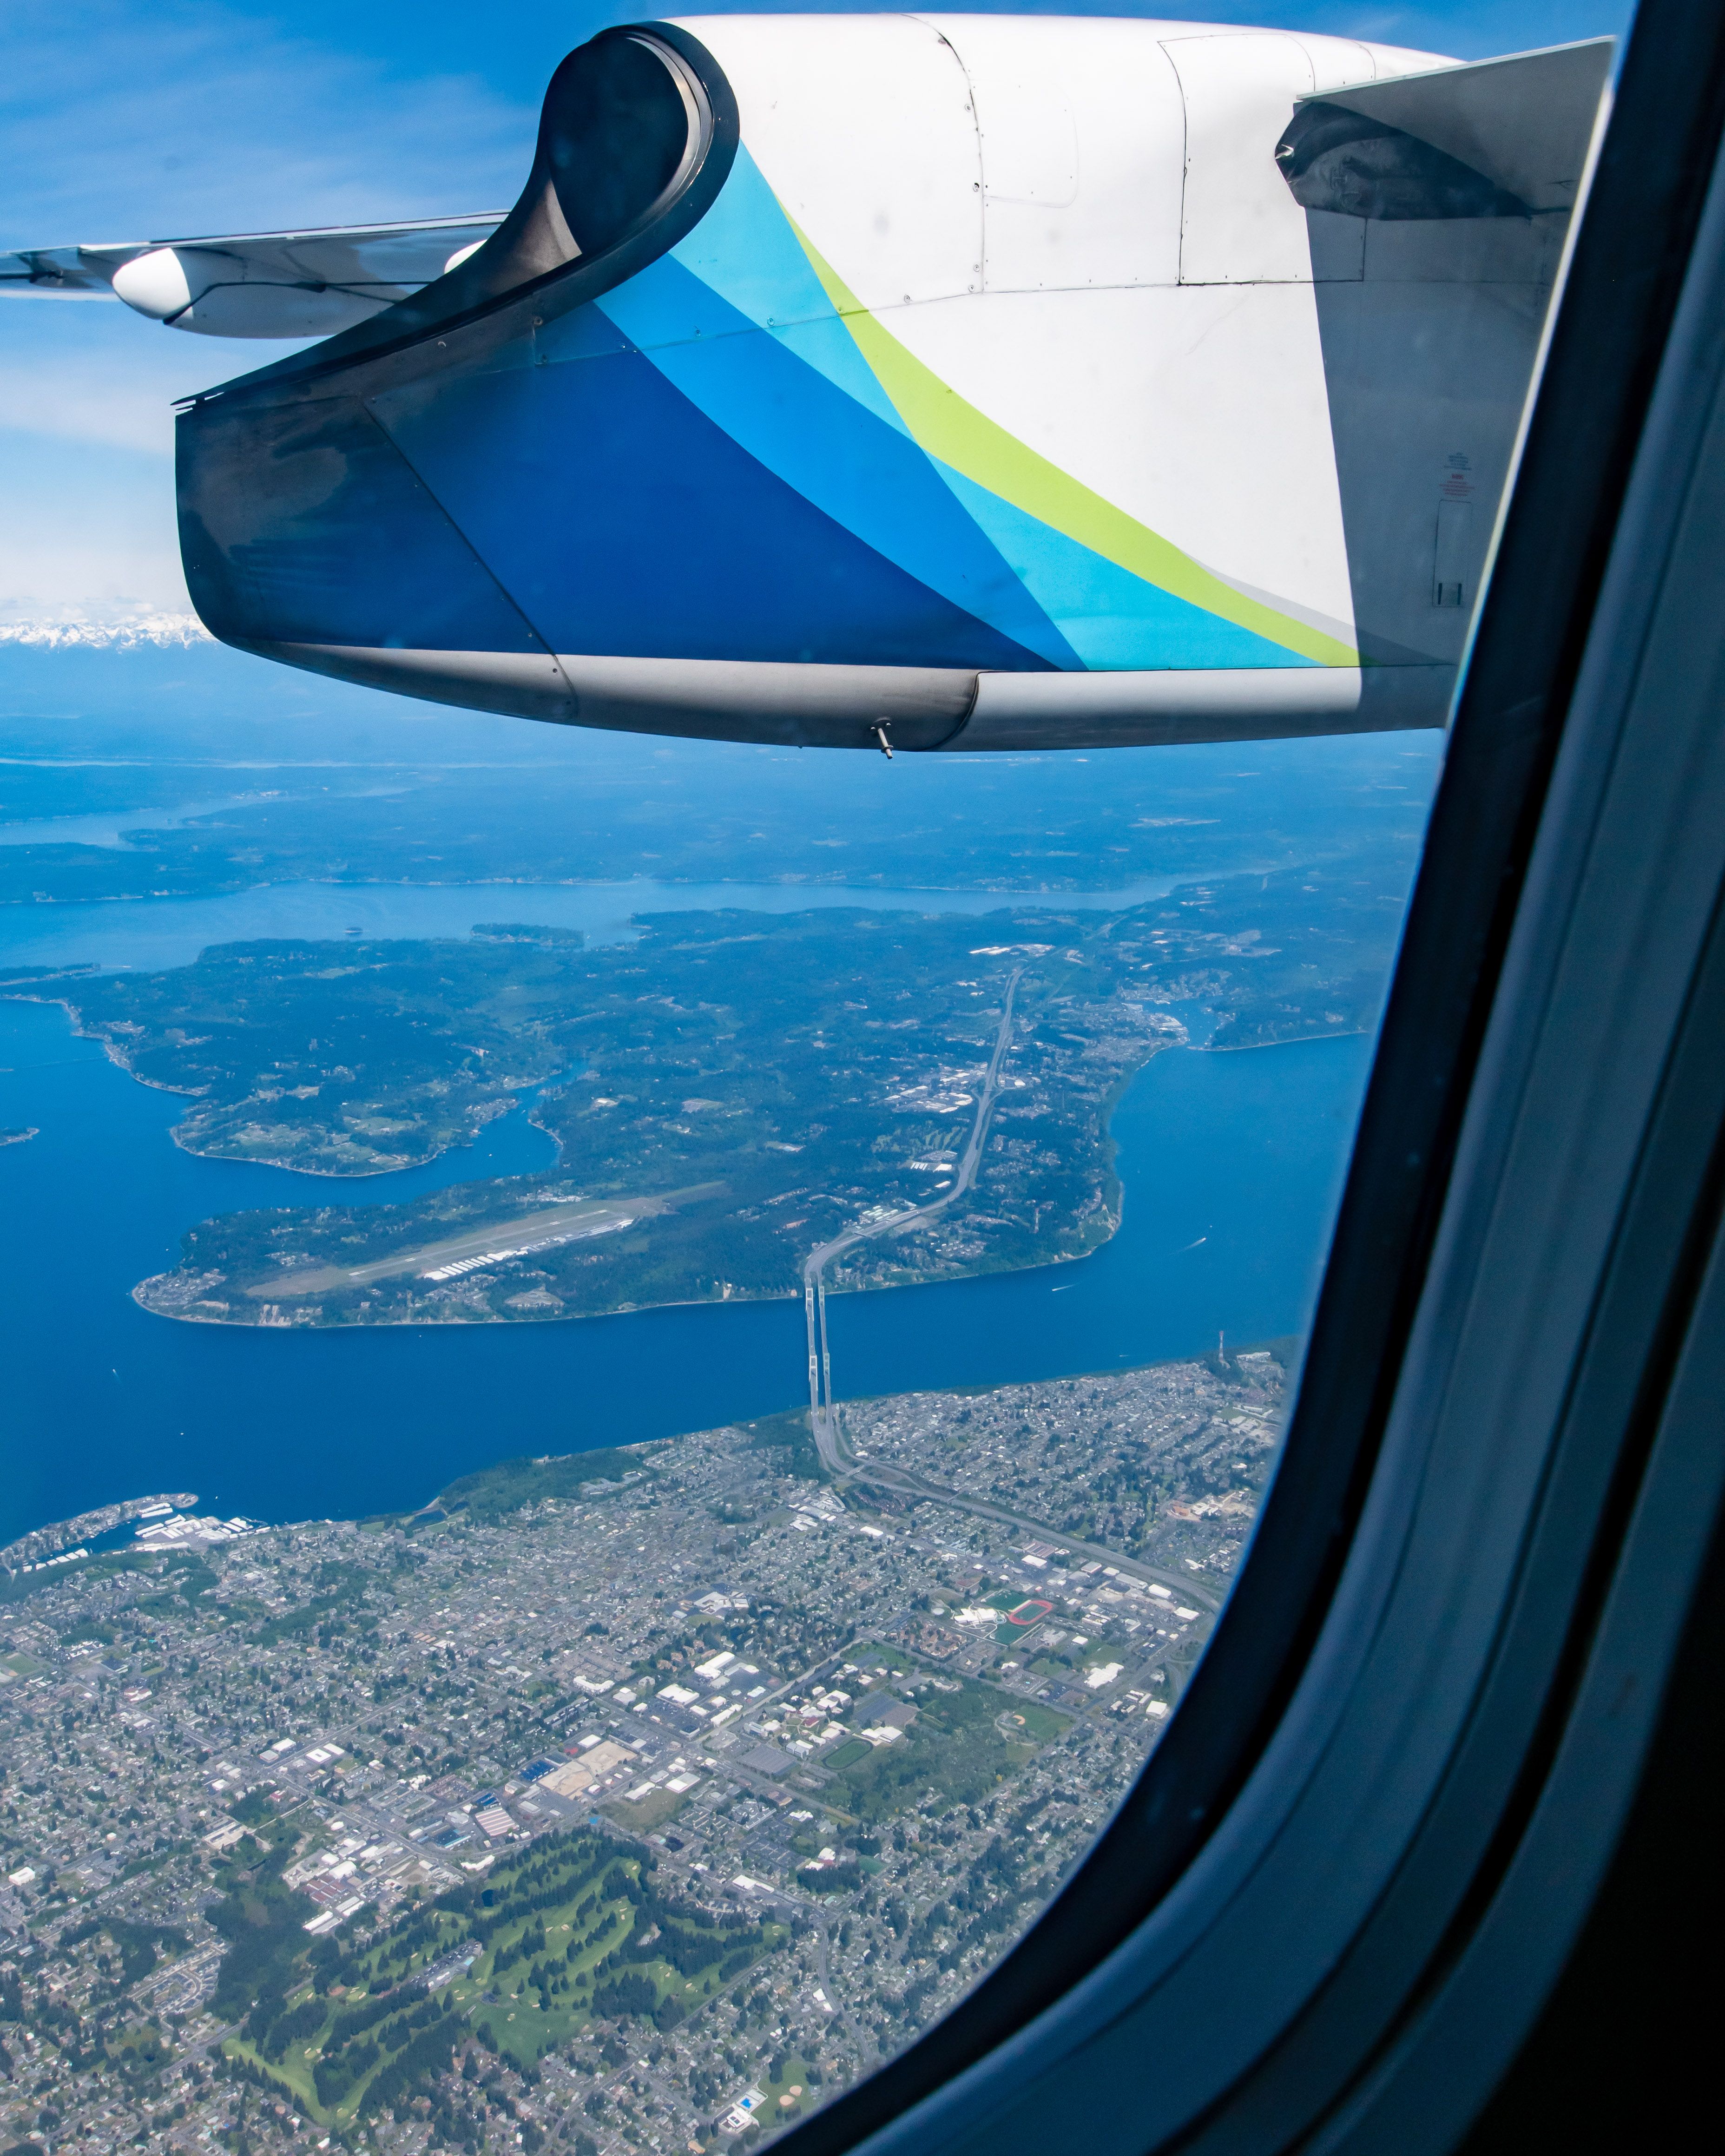 Tacoma and Tacoma Narrows From 10612.5 Feet - Complete With Dash 8-400 engine & wing in the frame